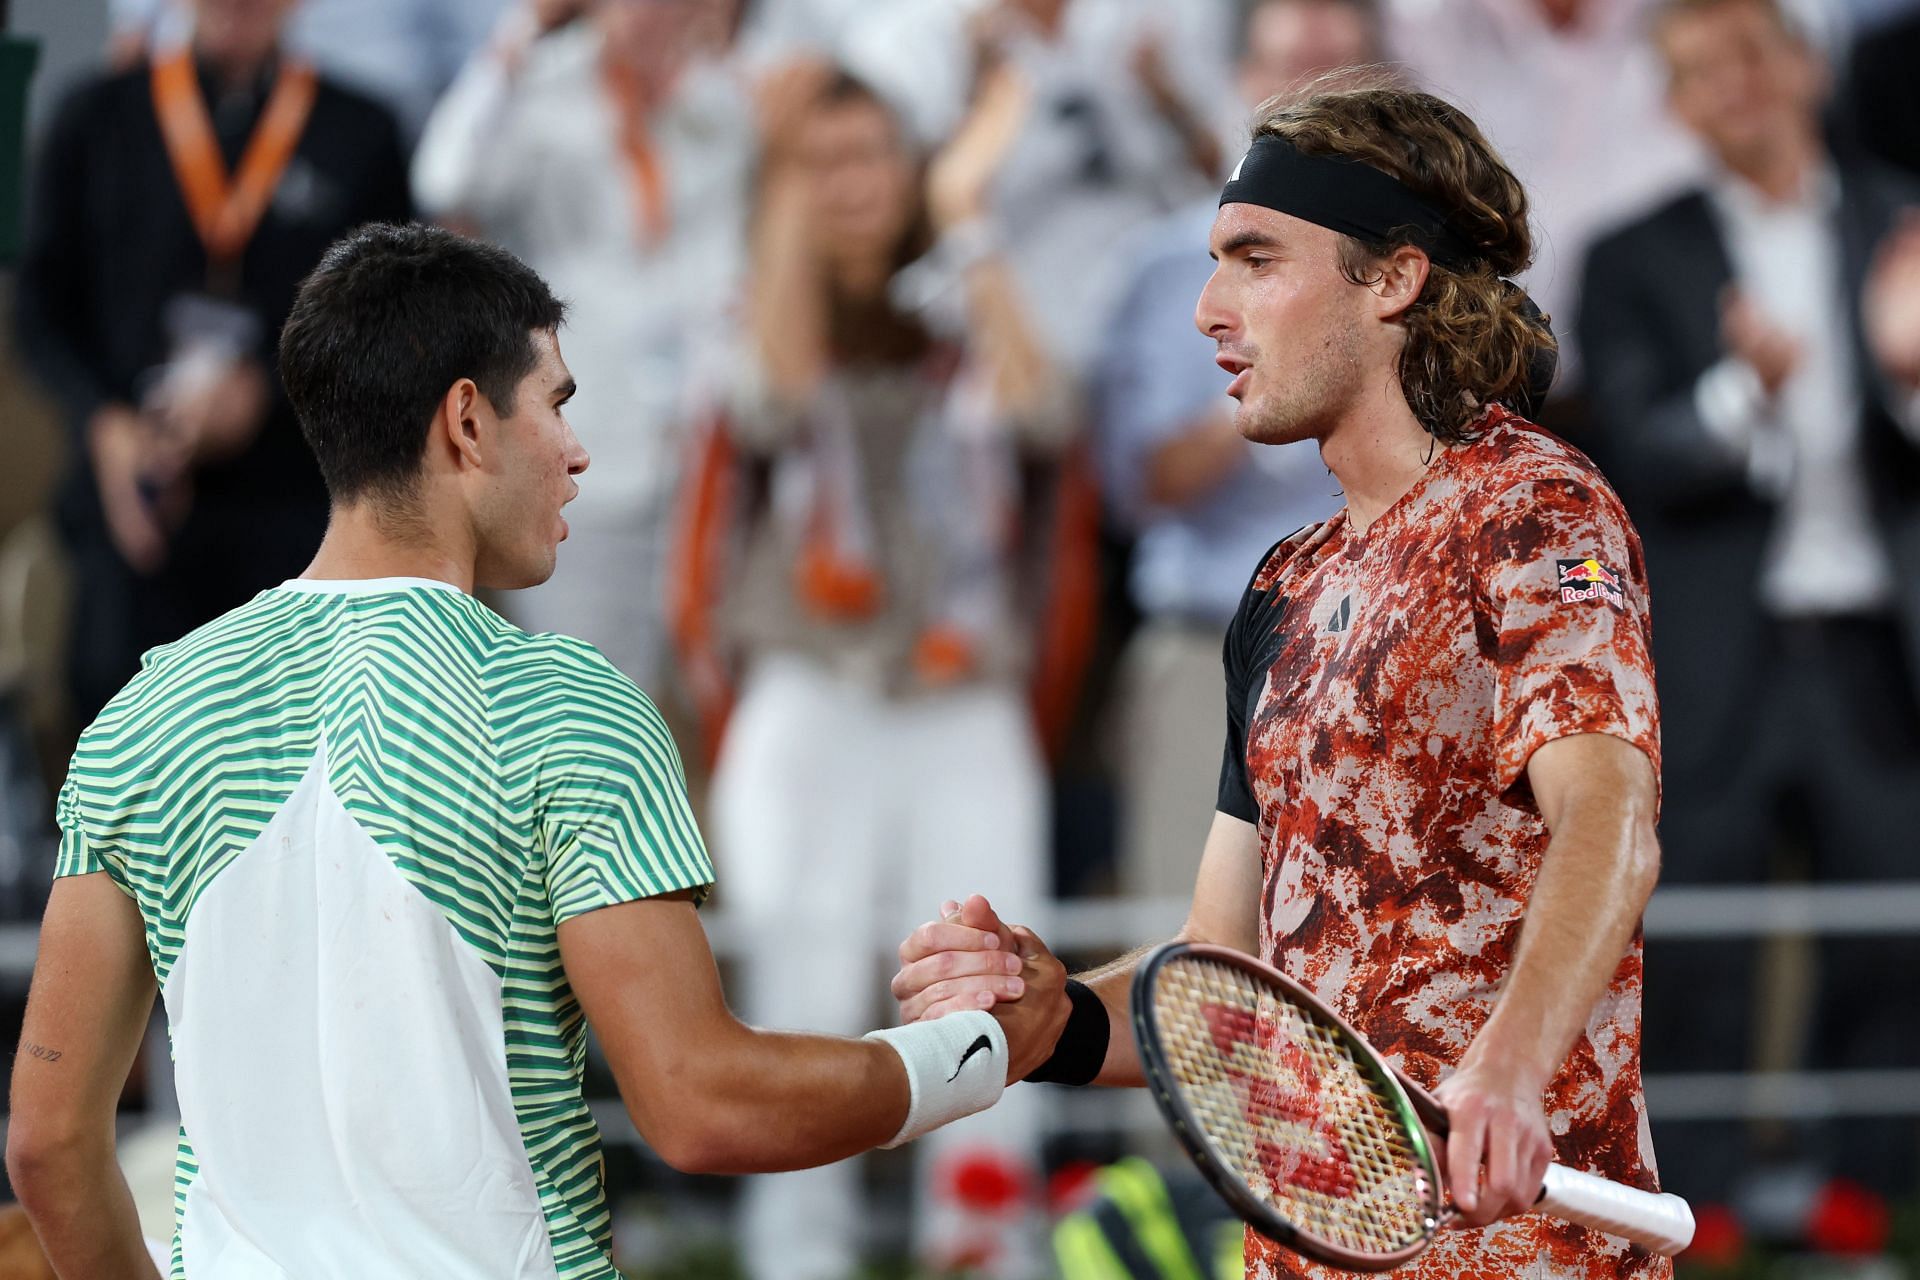 Carlos Alcaraz defeated Stefanos Tsitsipas in the 2023 French Open QF